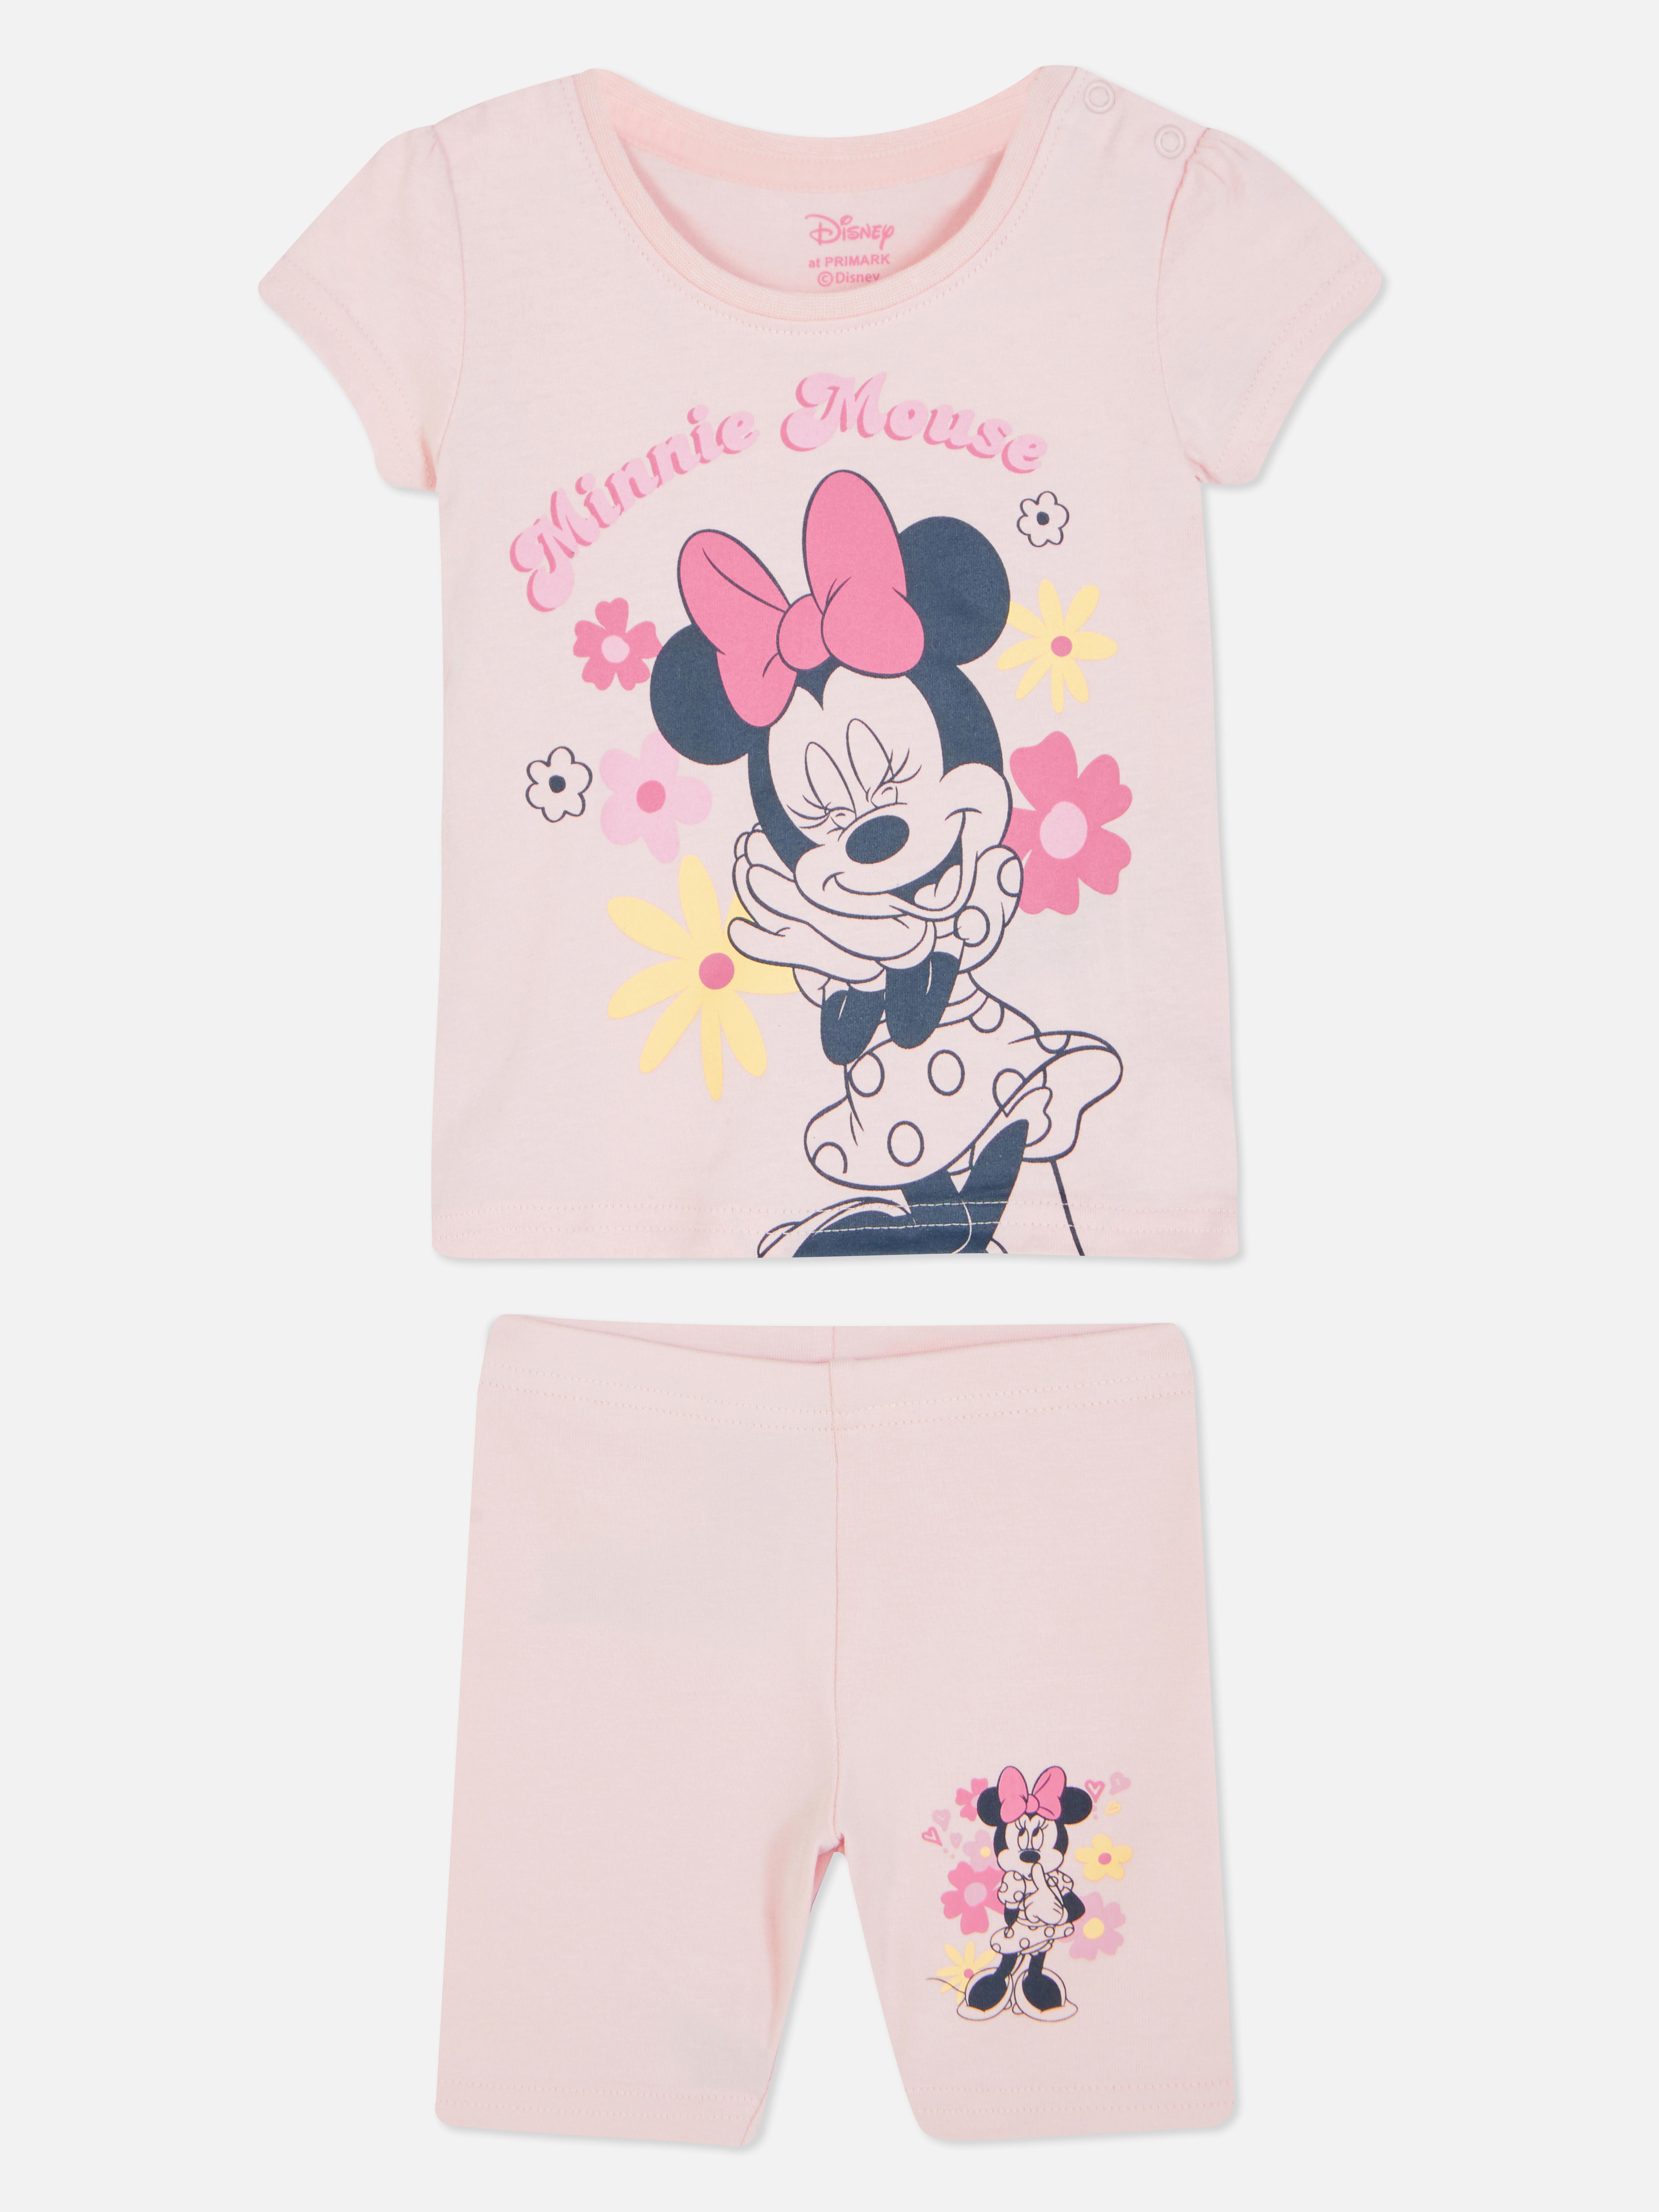 Disney’s Minnie Mouse T-shirt and Shorts Set